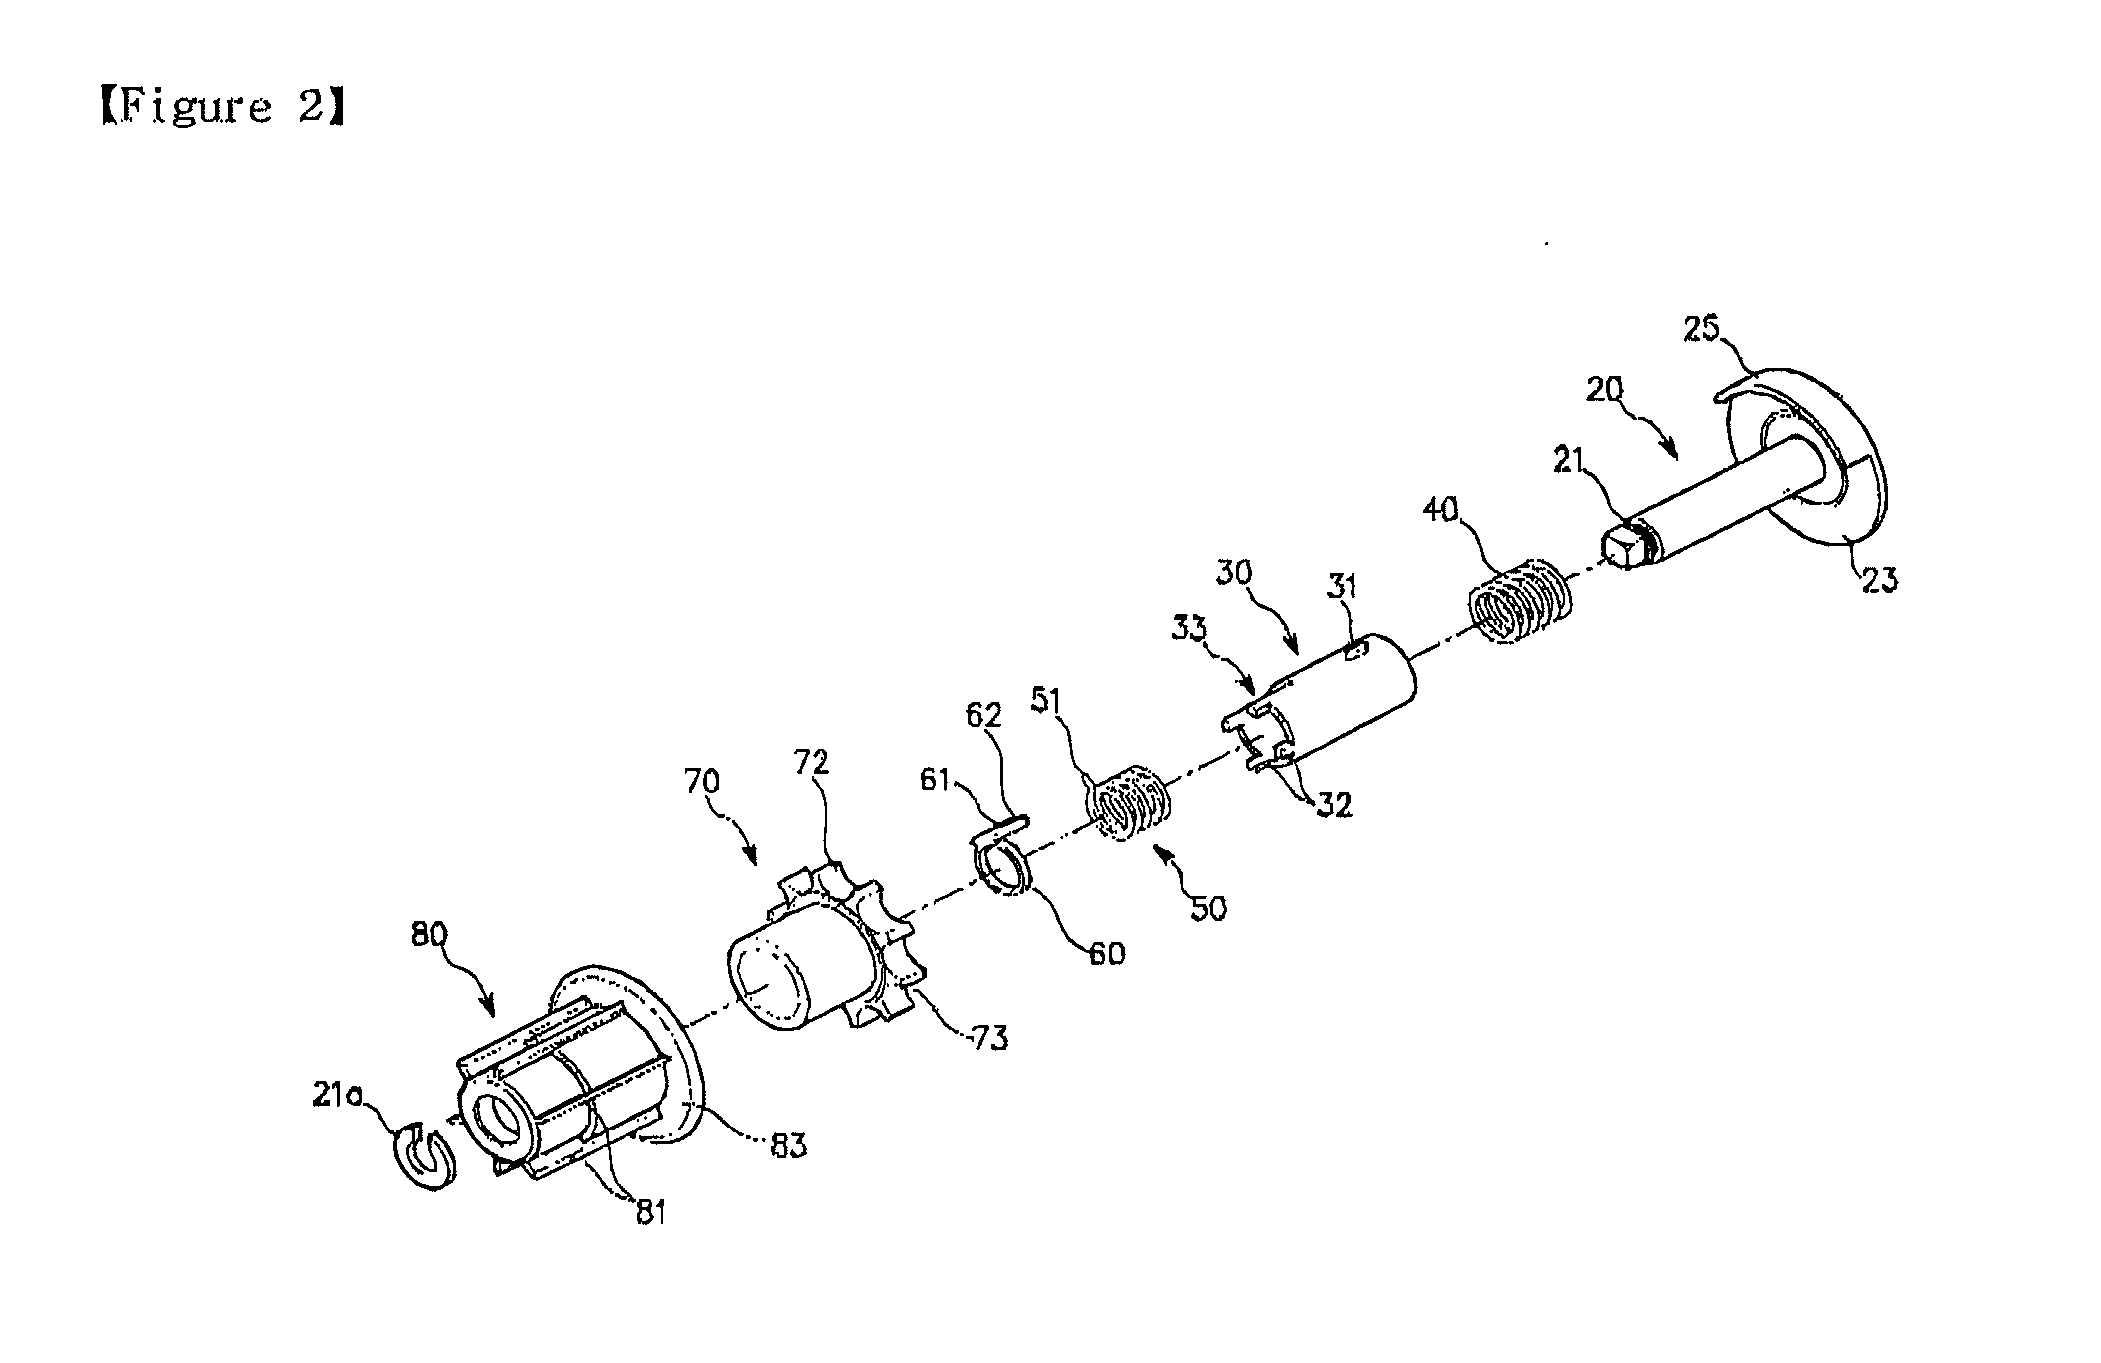 Automatic movement ascent device gear of roll screen